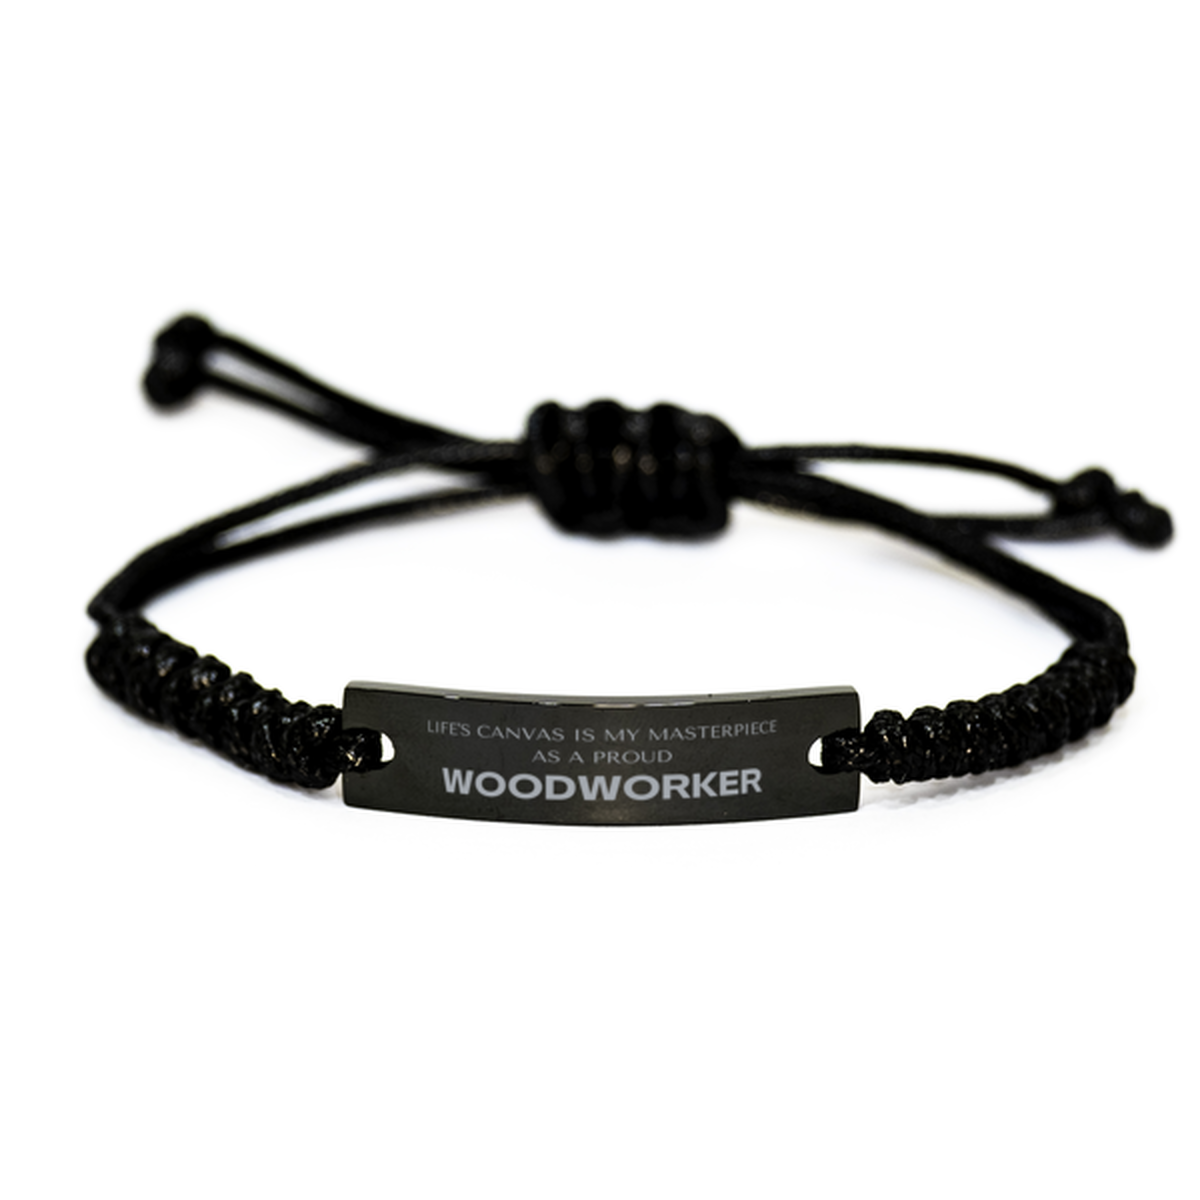 Proud Woodworker Gifts, Life's canvas is my masterpiece, Epic Birthday Christmas Unique Black Rope Bracelet For Woodworker, Coworkers, Men, Women, Friends